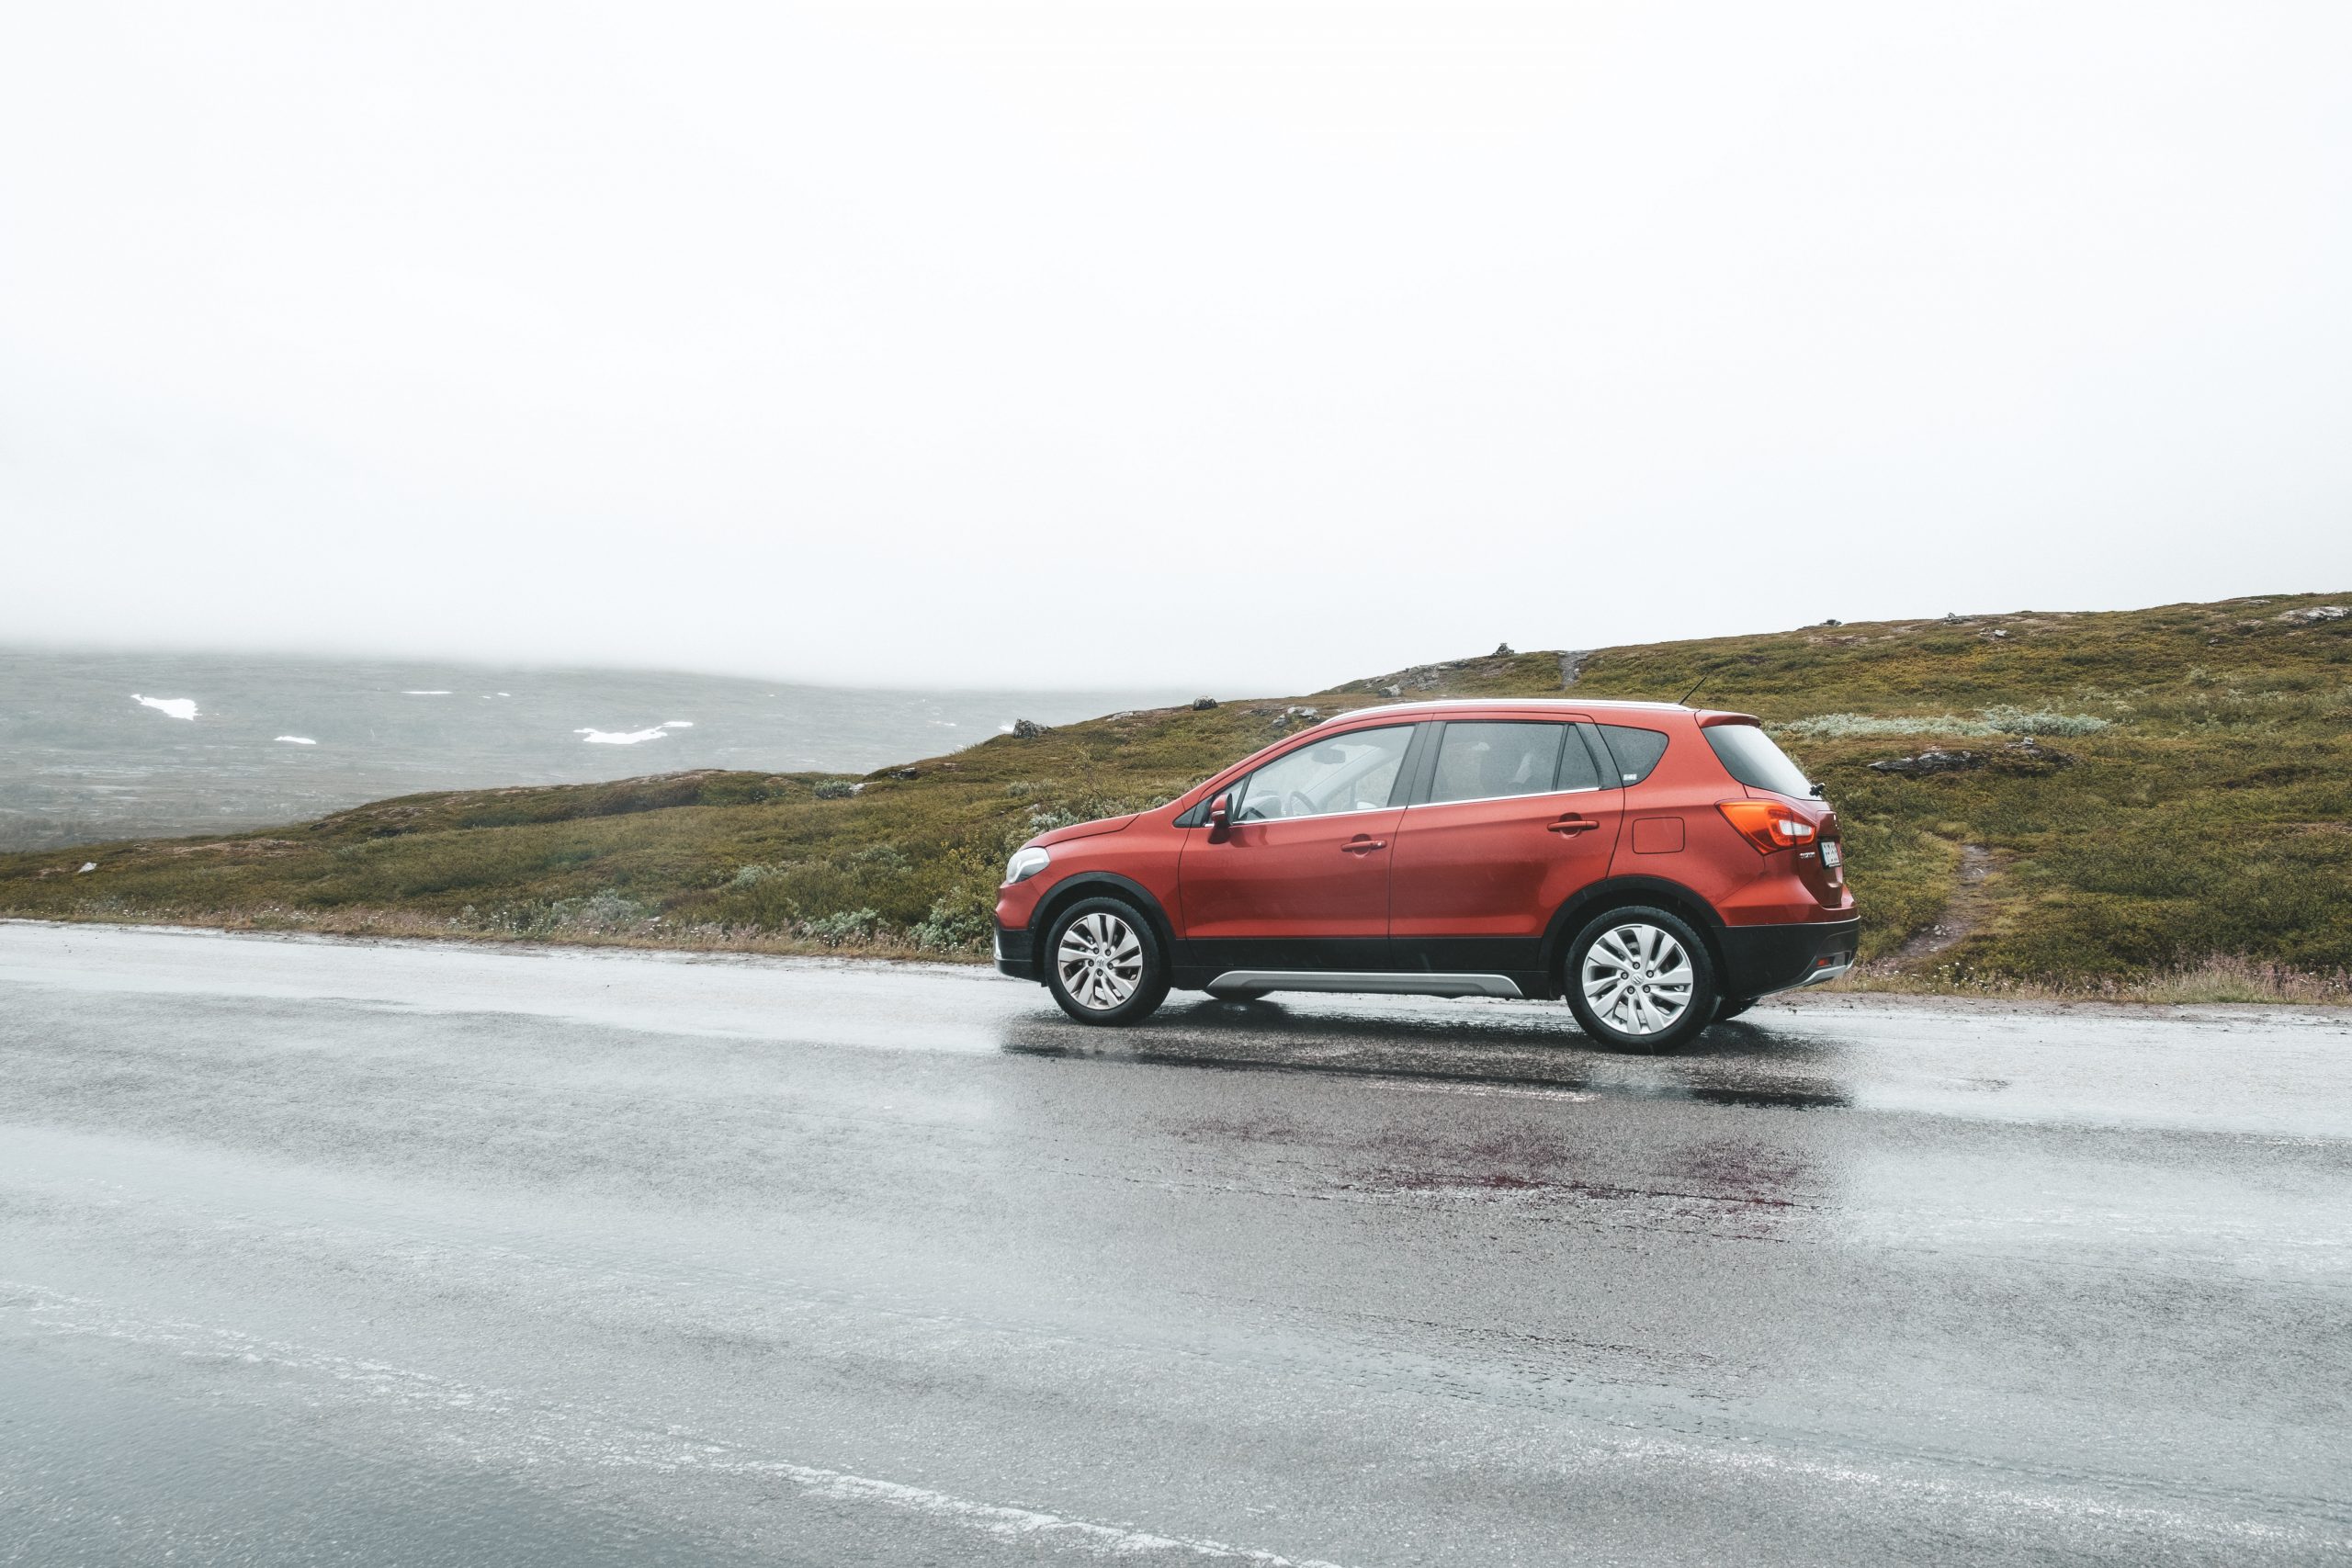 Entering Norway with the red Suzuki car